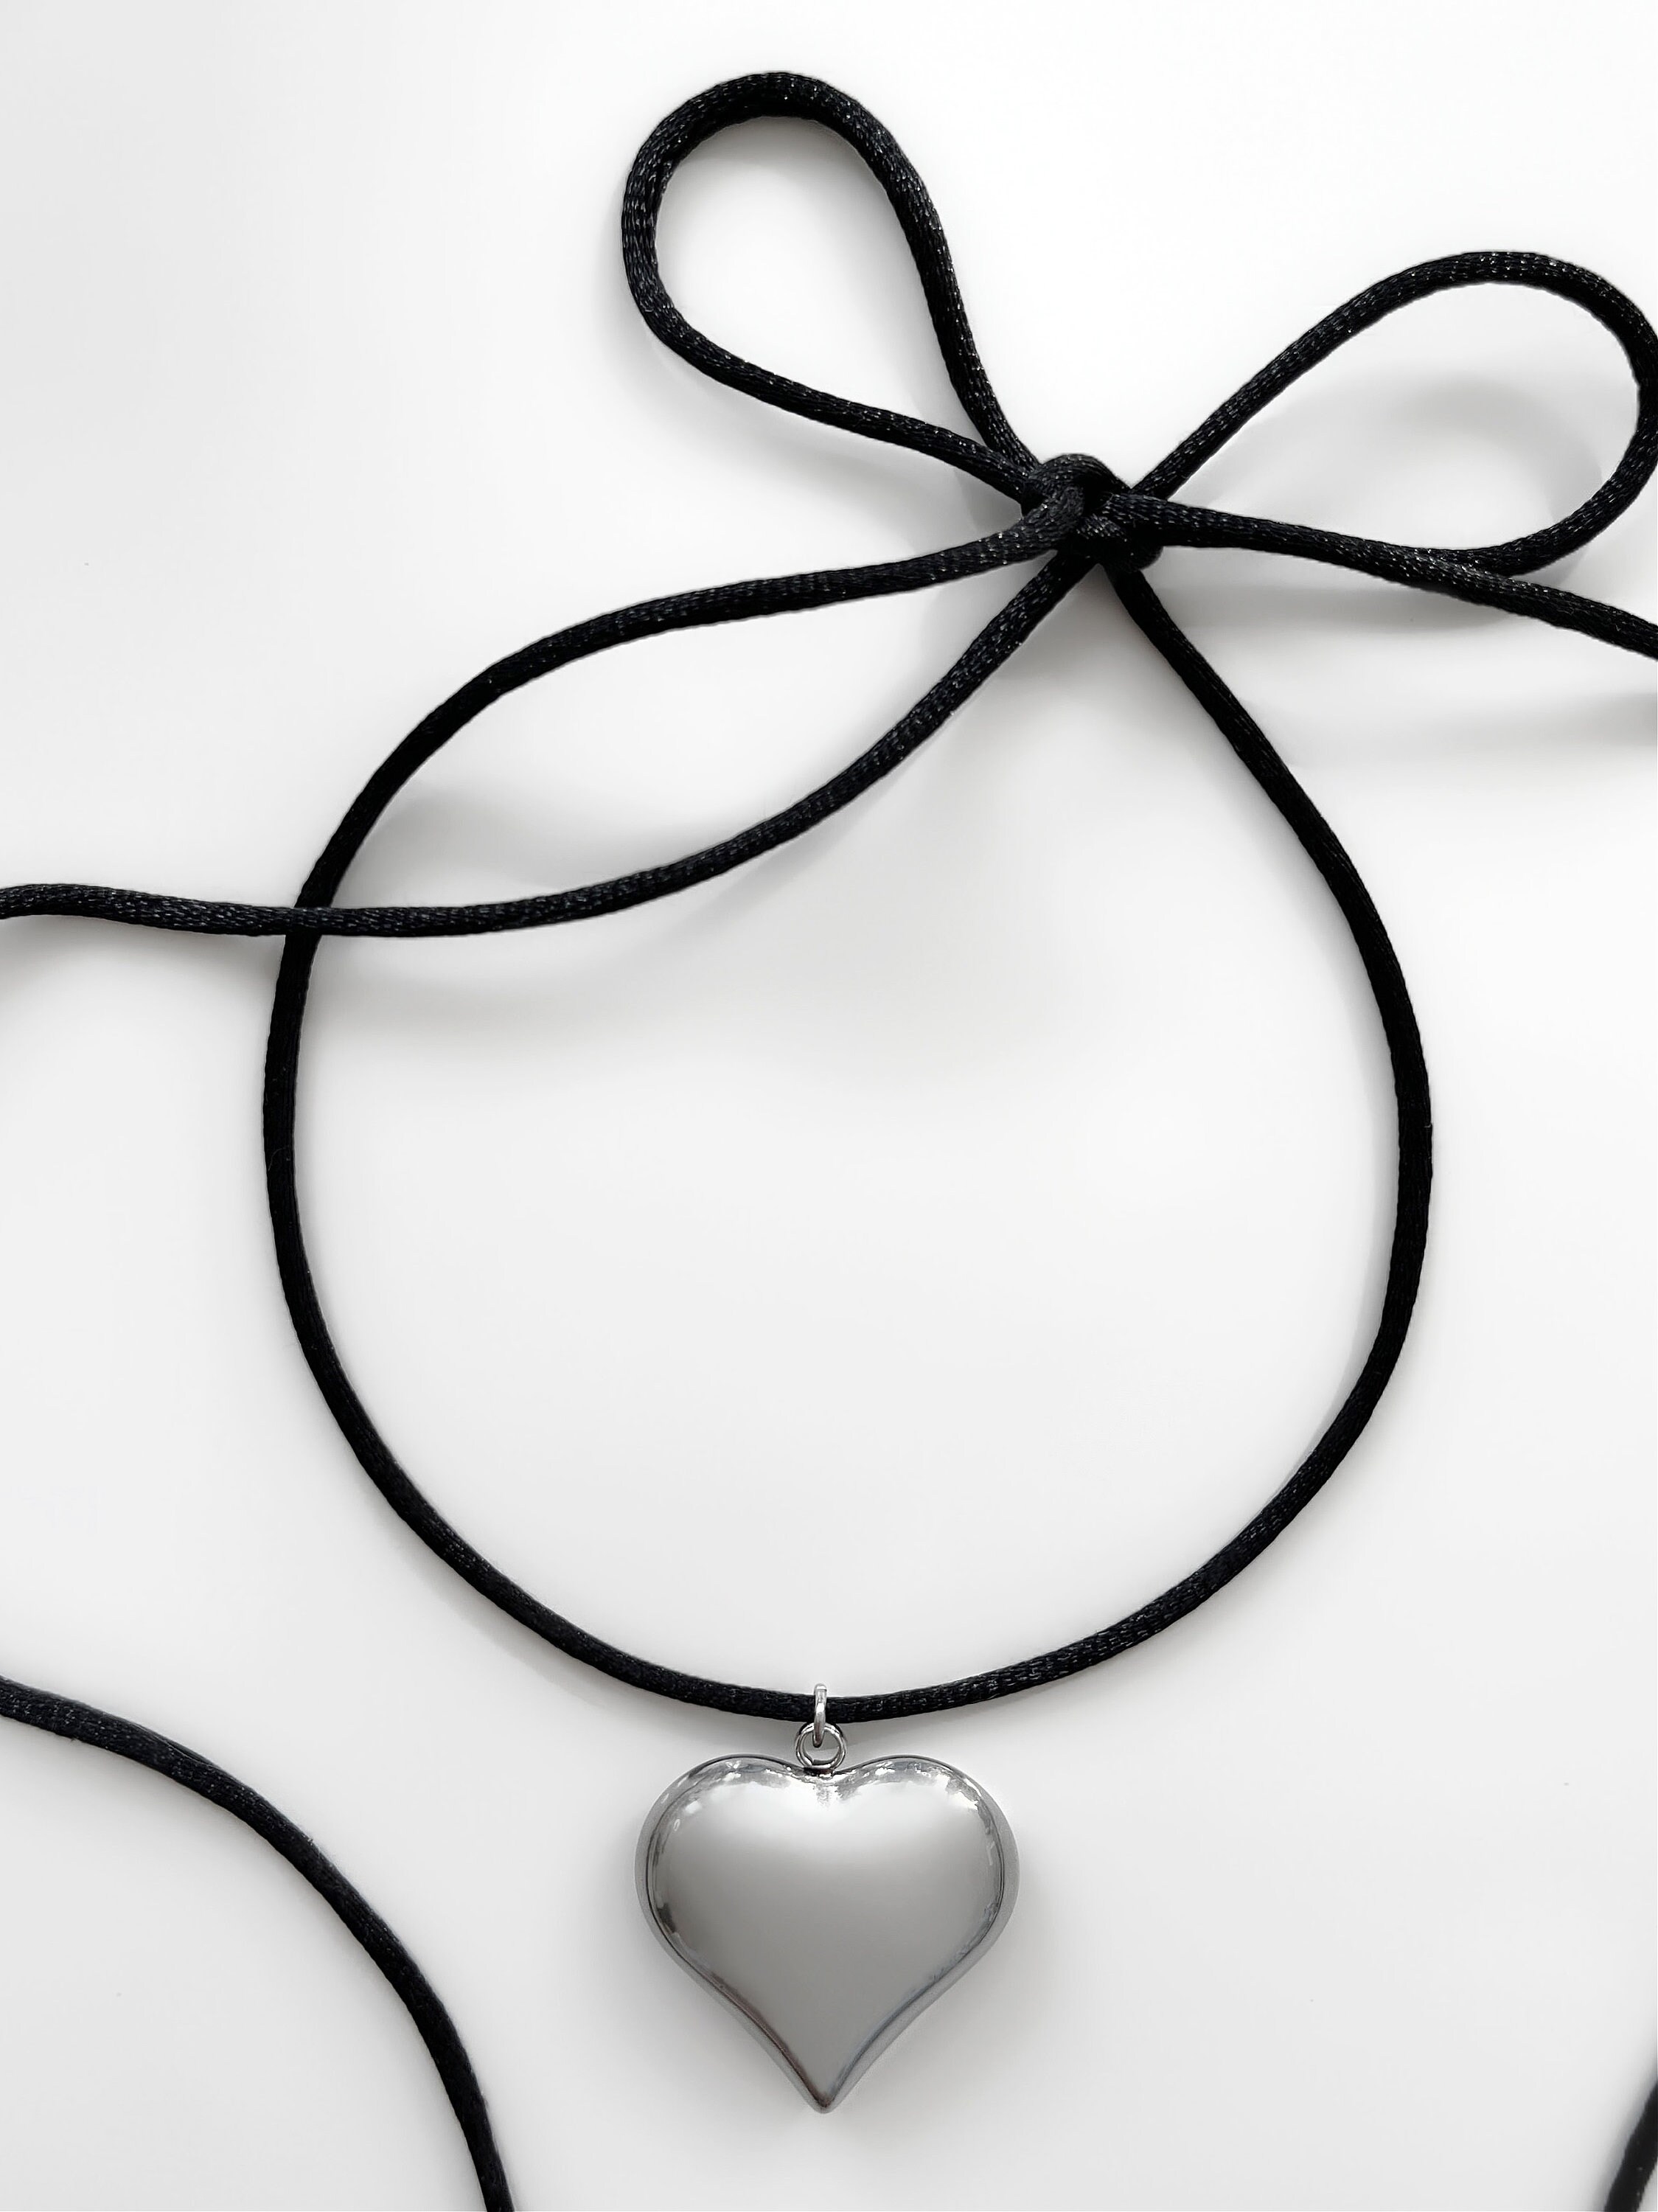 Puffed Heart String Necklace Black Cord Long Wrap Tie Choker Silver Gold  Stainless Steel Chunky 3D Puffy Pendant Handmade Unisex Jewelry 